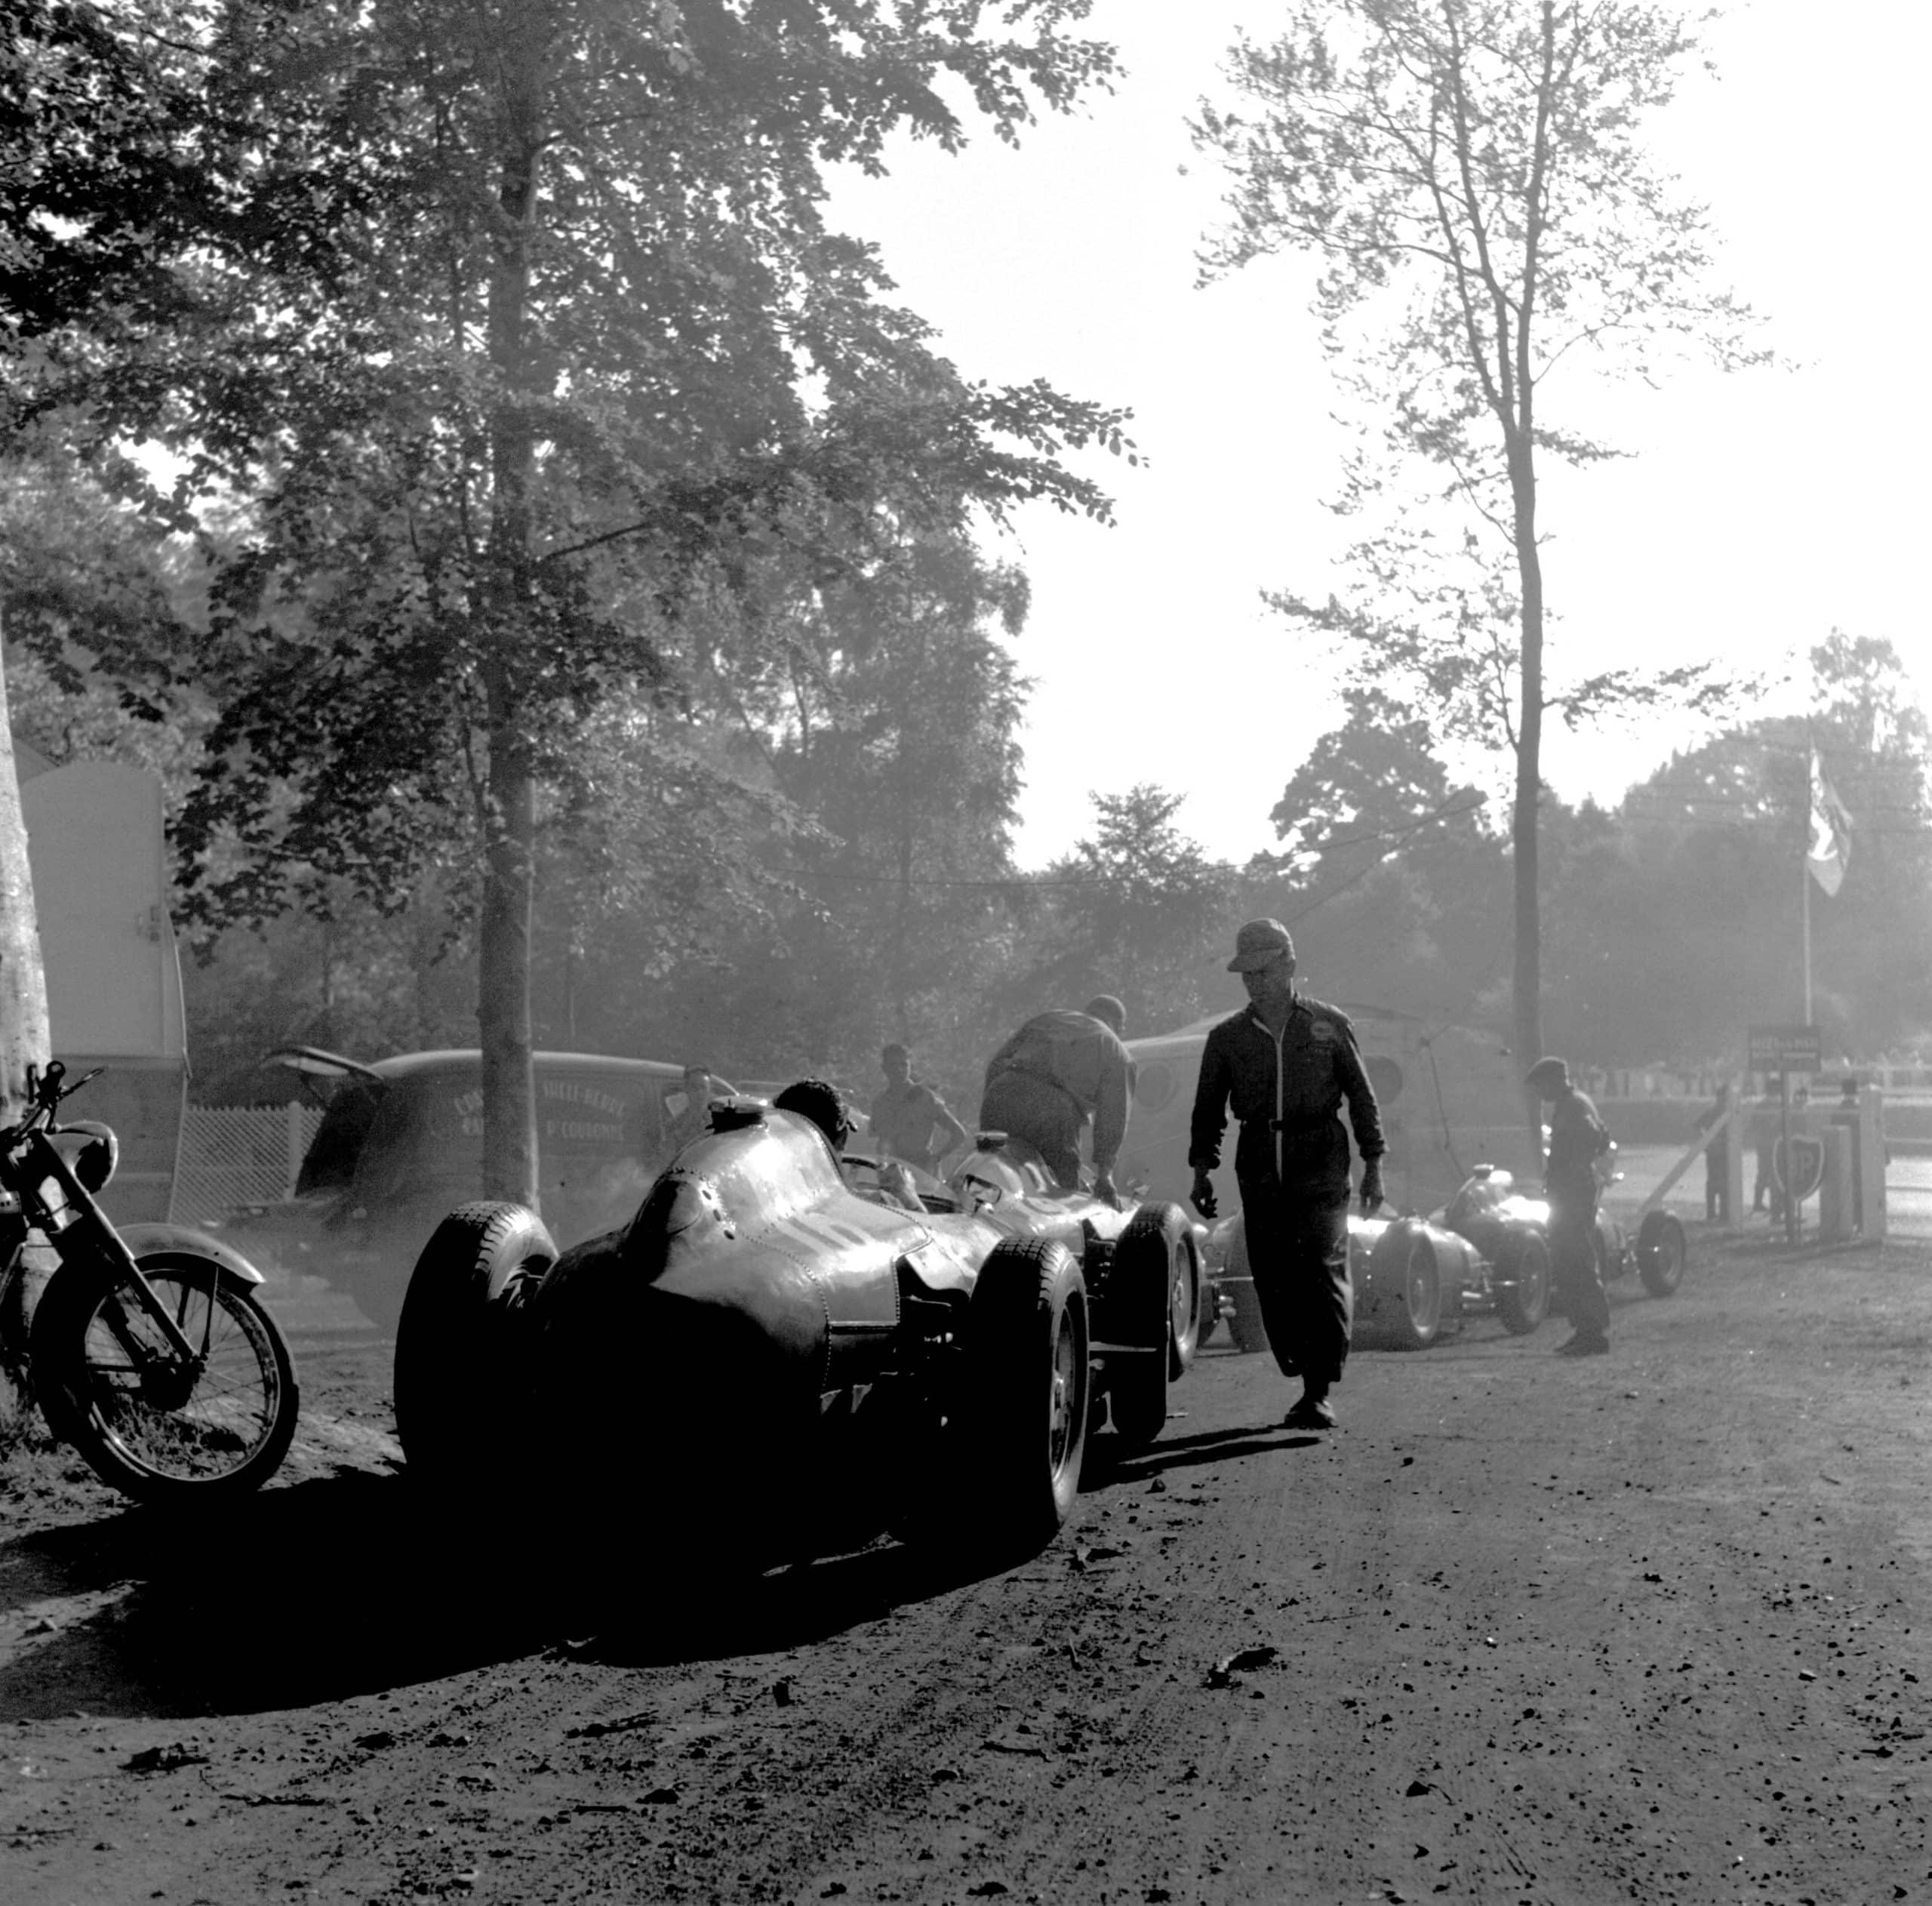 The French Grand Prix; Rouen-les Essarts, July 7, 1957. Early morning in the Rouen paddock which was in a lovely grove of pines � the Ferraris are in line to be fueled before the start. Car n. 16 was to be driven by the FrenchmanMaurice Trintignant, but did not finish. Once again Klemantaski uses the natural composition of the surroundings in early morning to evoke the silence before the thunder of the coming race. In the race itself, Fangiowas totally dominant in his Maserati 250F, presaging his astounding victory at the Nürburgring which would come a month later. Starting from pole position, he finished almost a minute ahead of Musso�s Ferrari. (Photo by Klemantaski Collection/Getty Images)